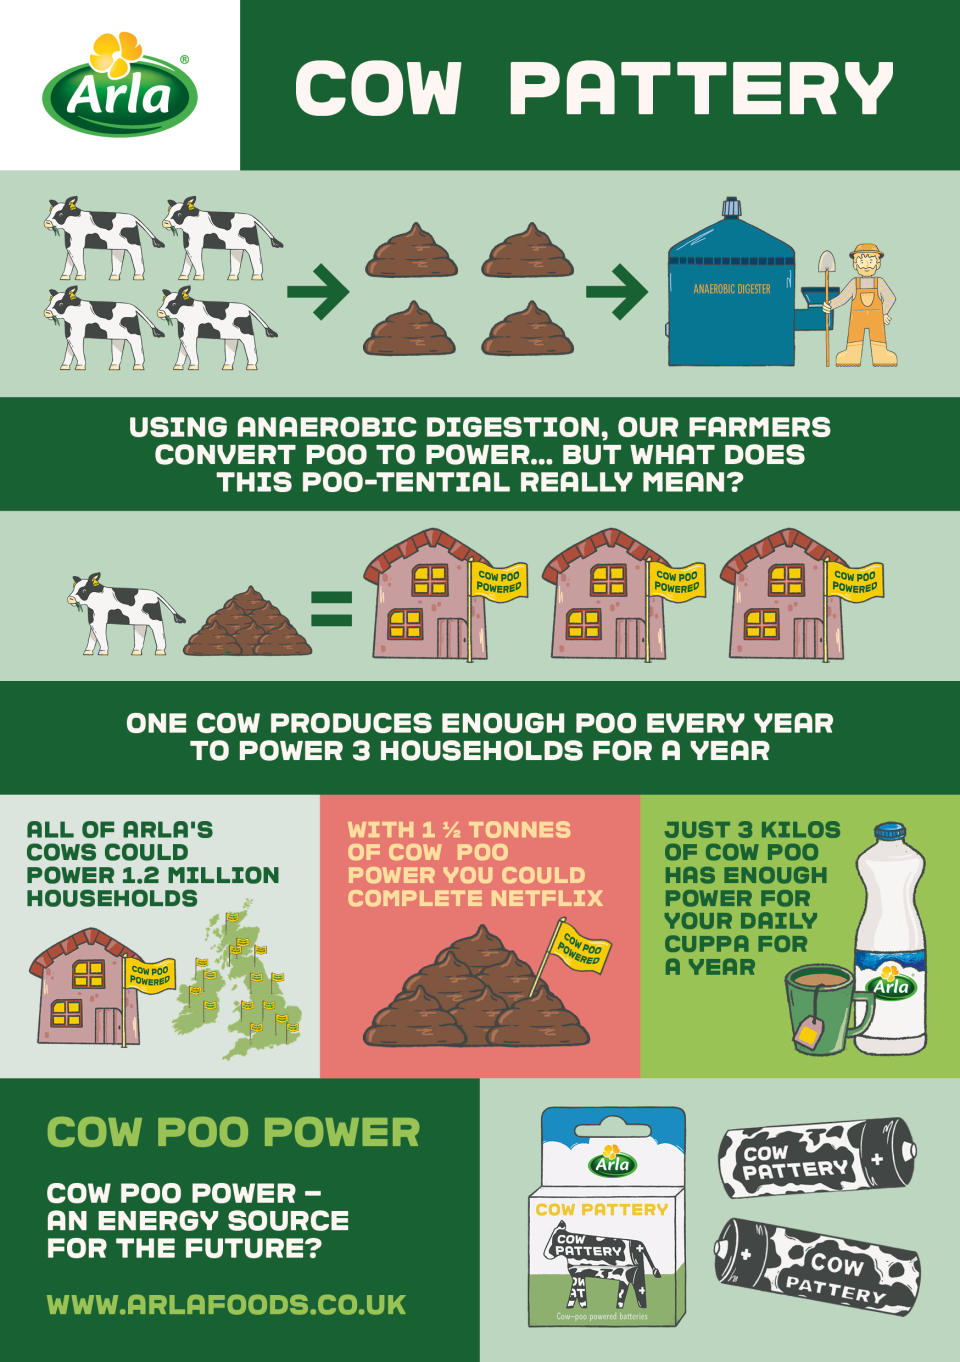 Arla’s 460,000 cows could also provide enough power each year to fuel over 1.2m homes